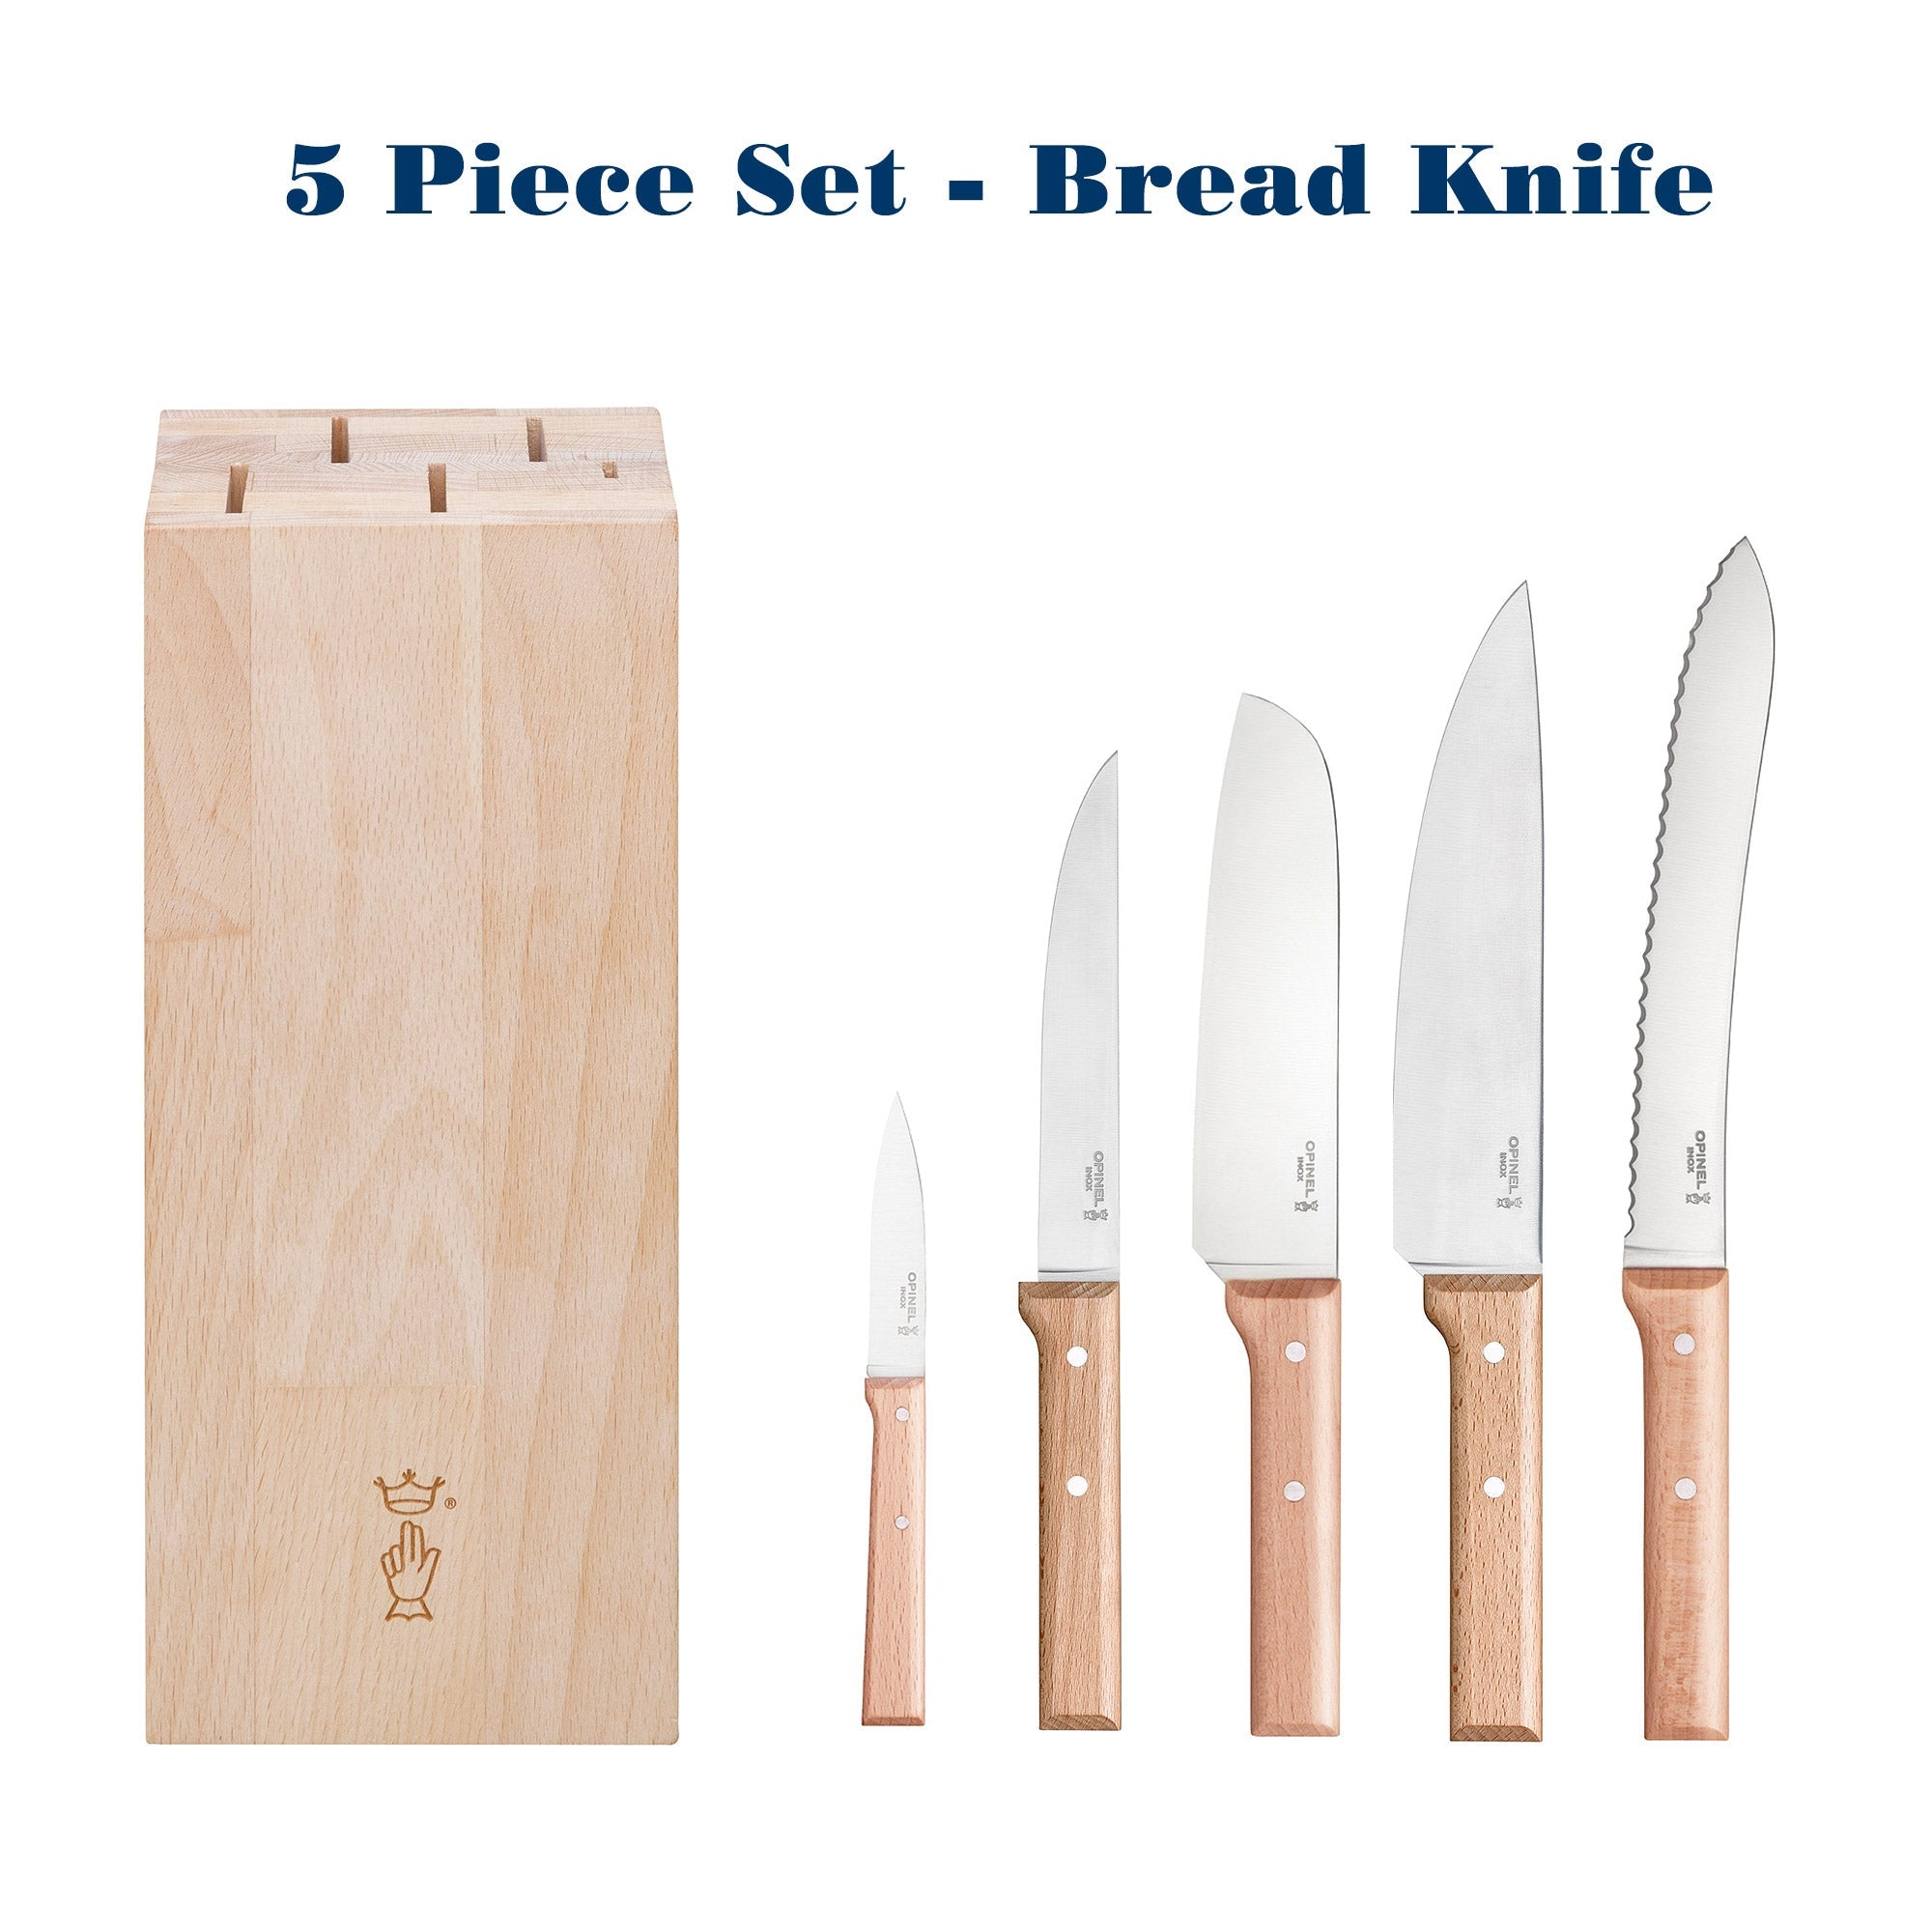 Opinel France N°122 Parallèle, A kitchen knife suitable for